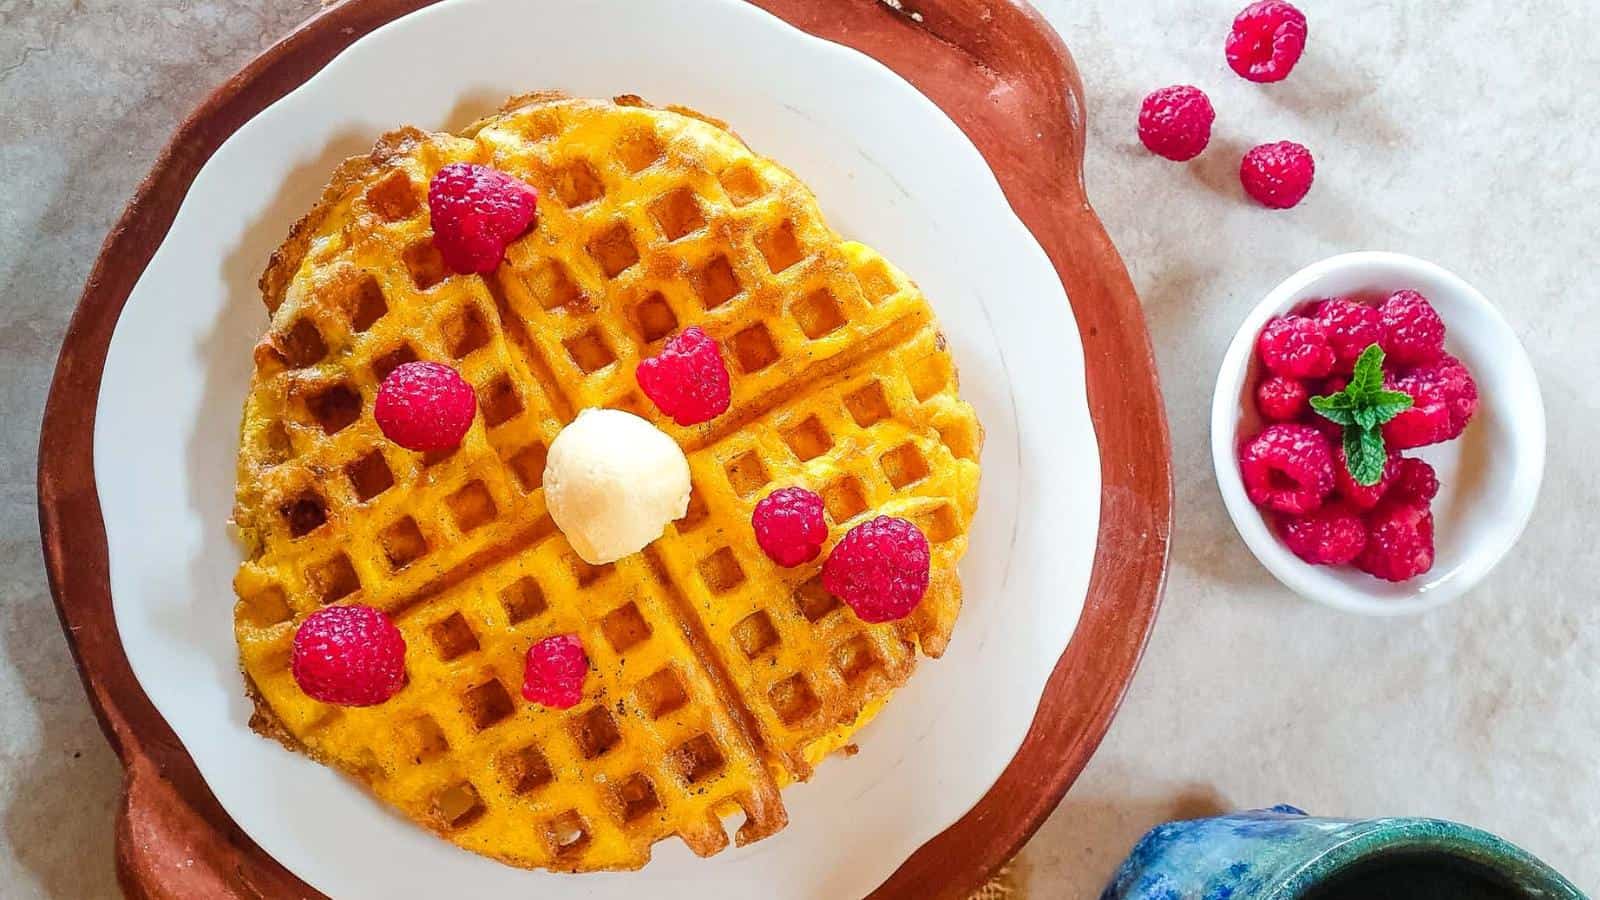 <p>Breakfast couldn’t get simpler with these 2-Ingredient Flourless Waffles. They’re low-carb and so easy to make, you’ll wonder why you haven’t tried them sooner. Even if cooking’s not your thing, these waffles have got you covered.<br><strong>Get the Recipe: </strong><a href="https://www.primaledgehealth.com/2-ingredient-keto-waffles/?utm_source=msn&utm_medium=page&utm_campaign=msn">2-Ingredient Flourless Waffles</a></p>